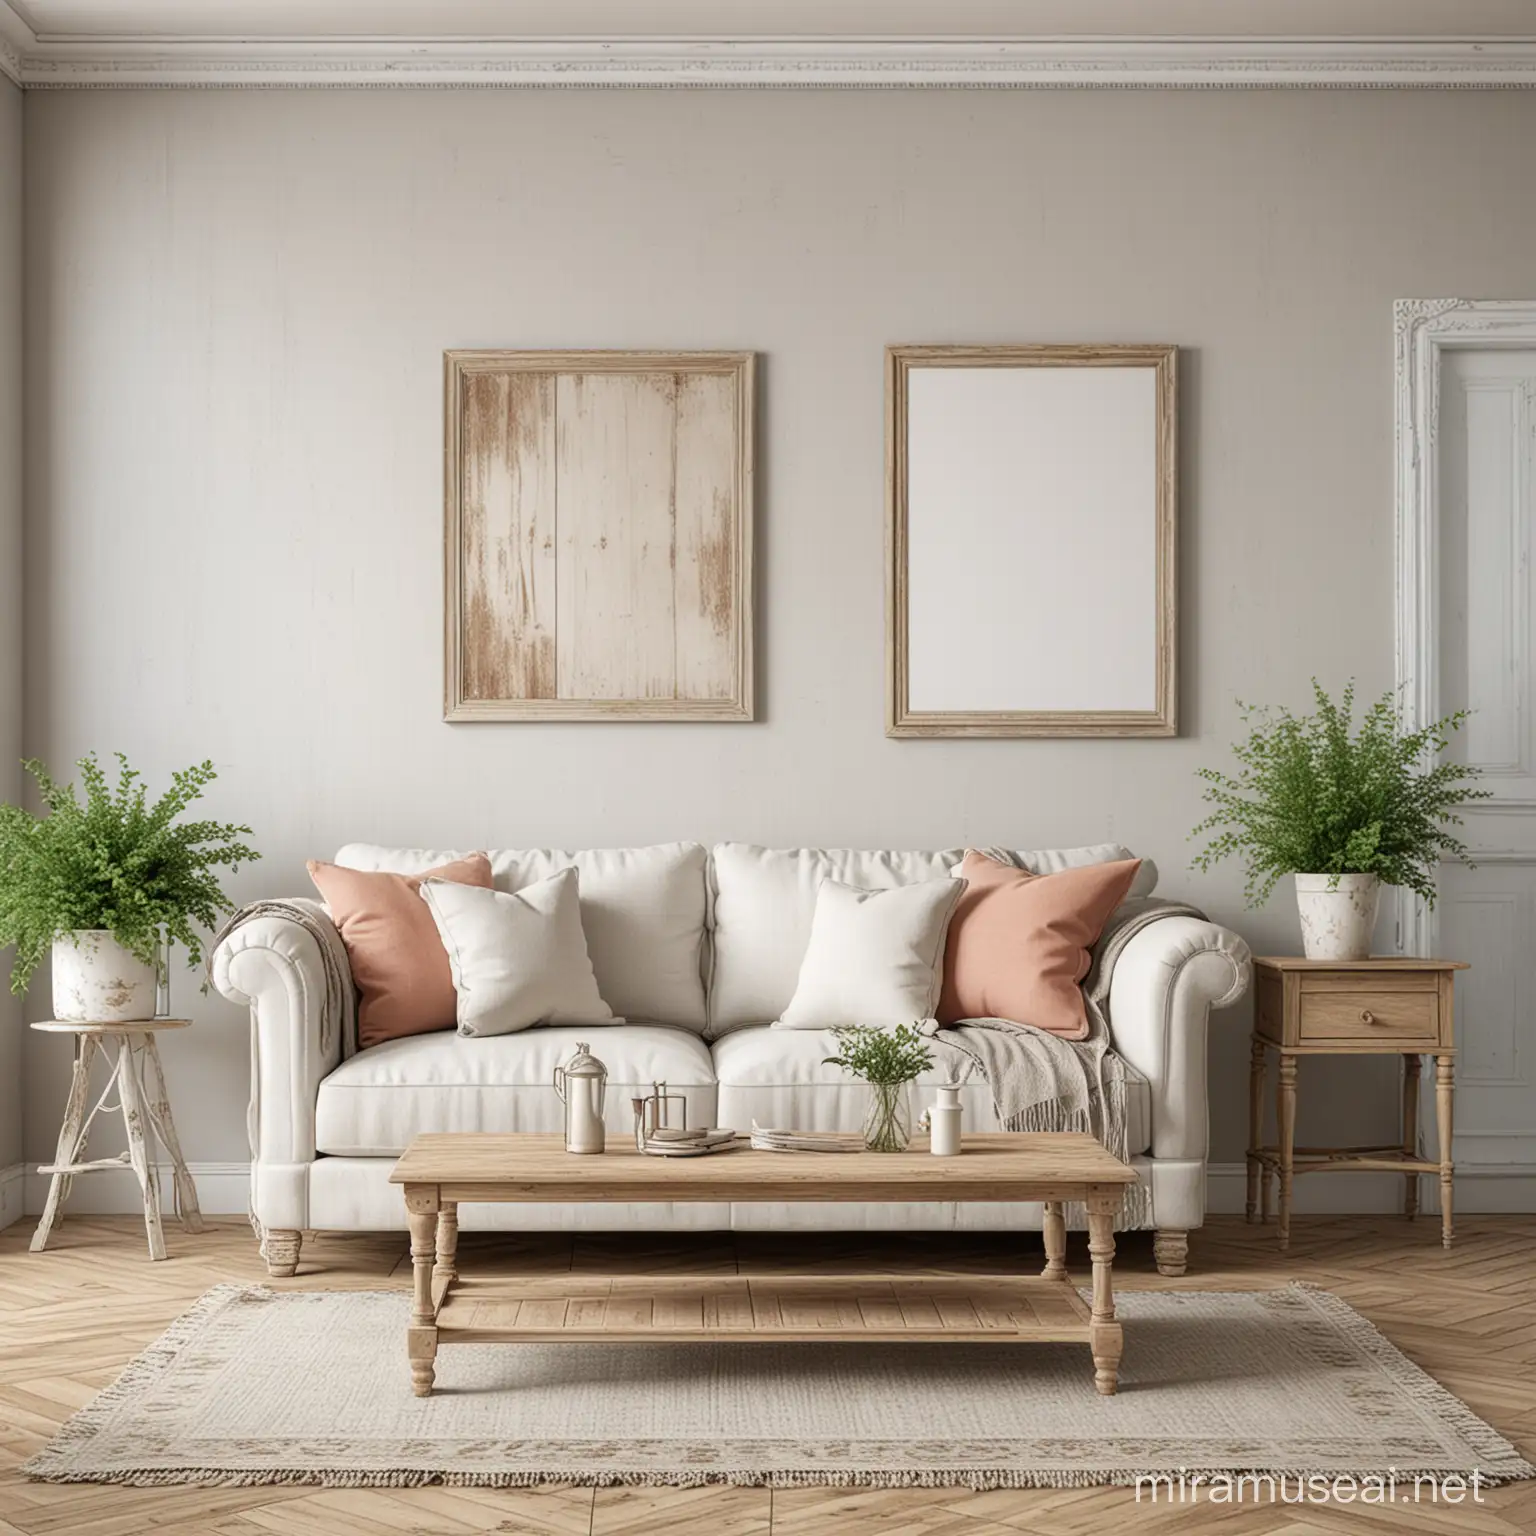 Cozy Shabby Chic Living Room Mockup with Vintage Decor